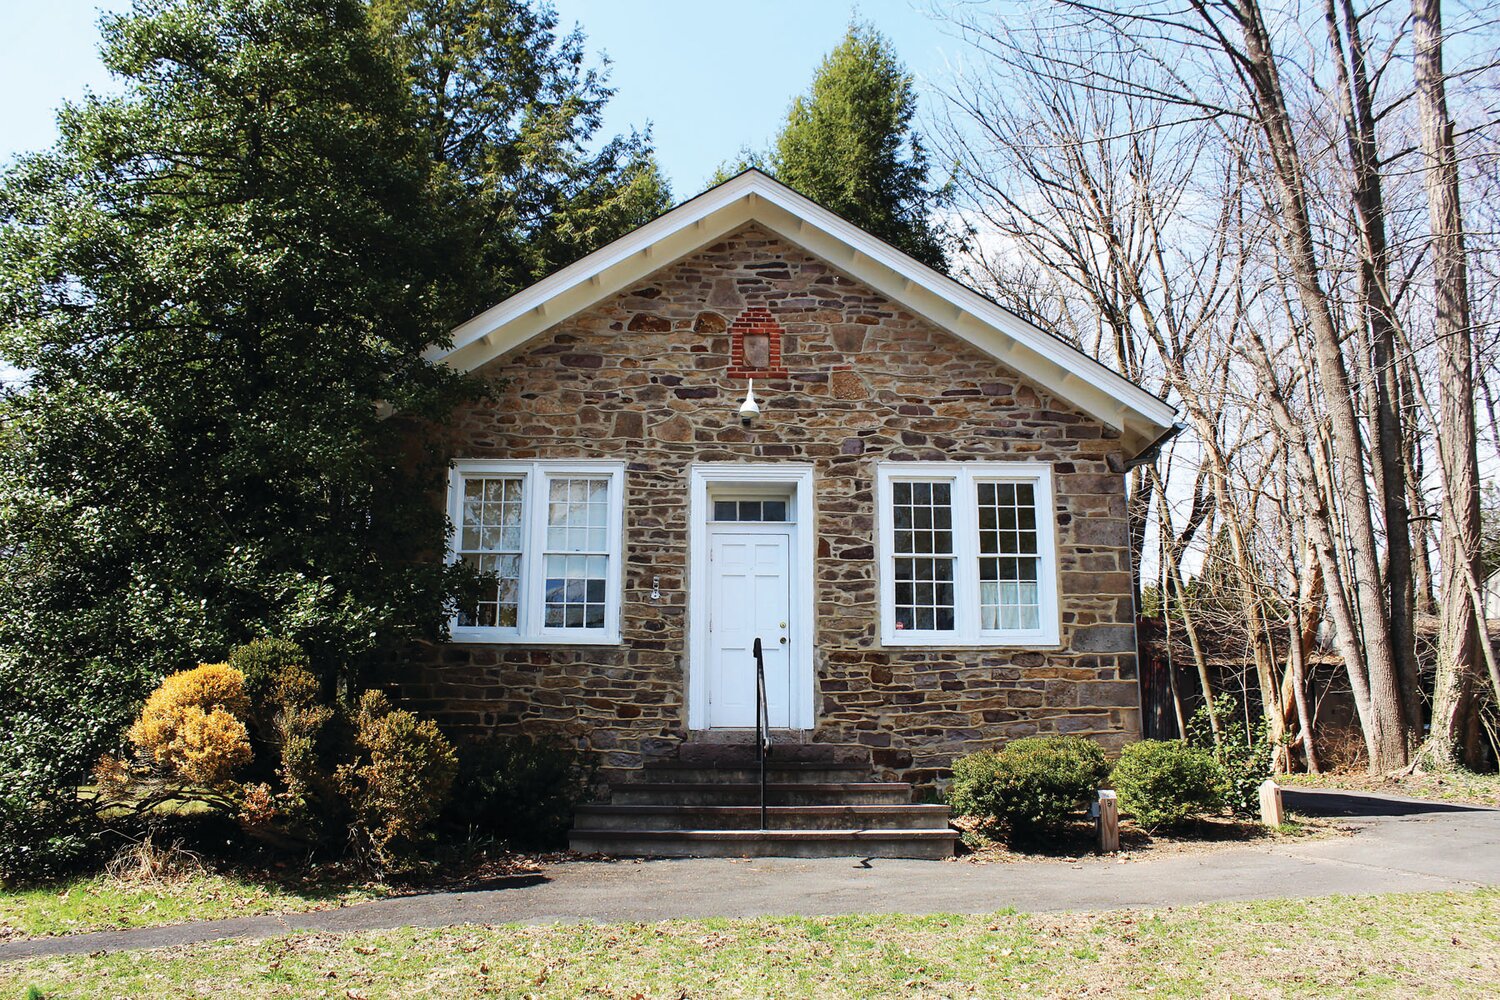 This one-room schoolhouse, at the corner of Sugan and Upper York roads, houses the nonprofit Solebury Township Historical Society.